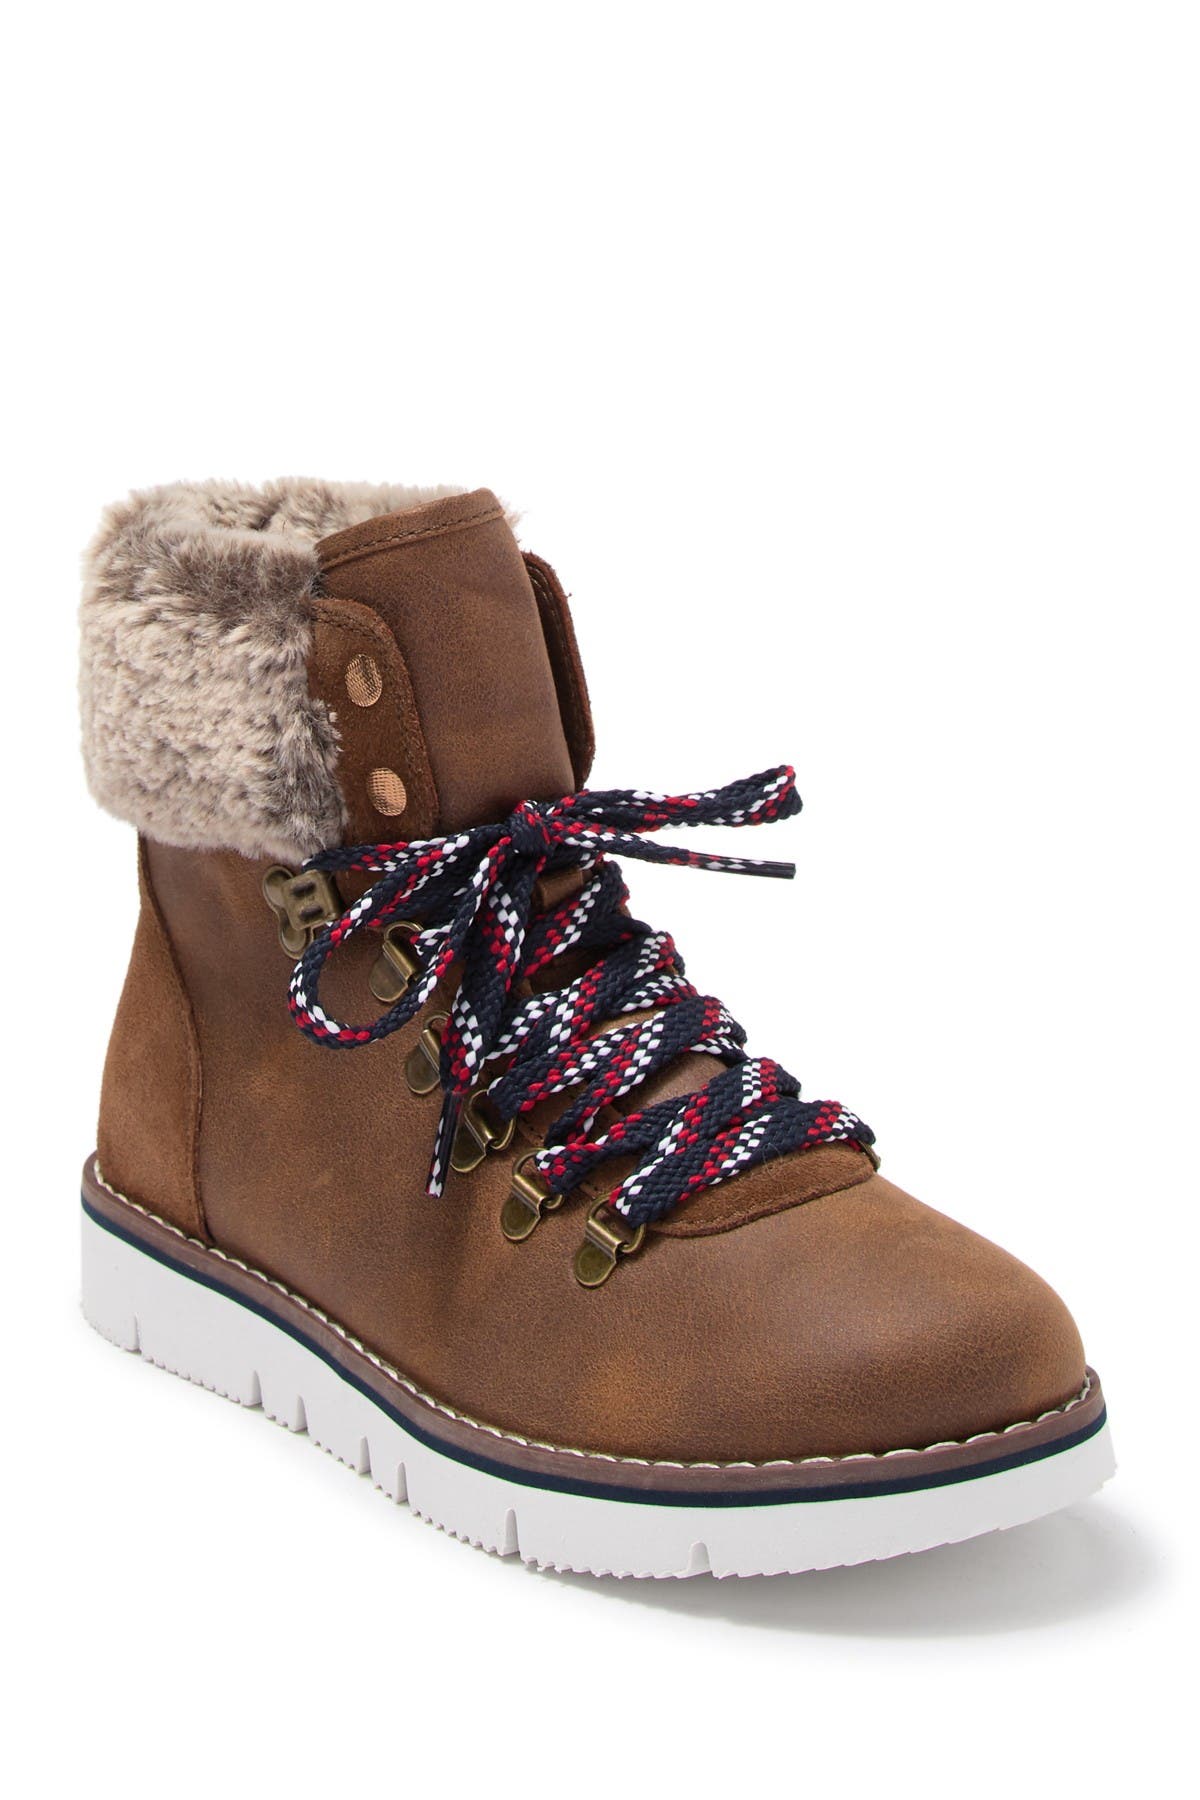 Skechers Bobs Rocky Online Sale, UP TO 